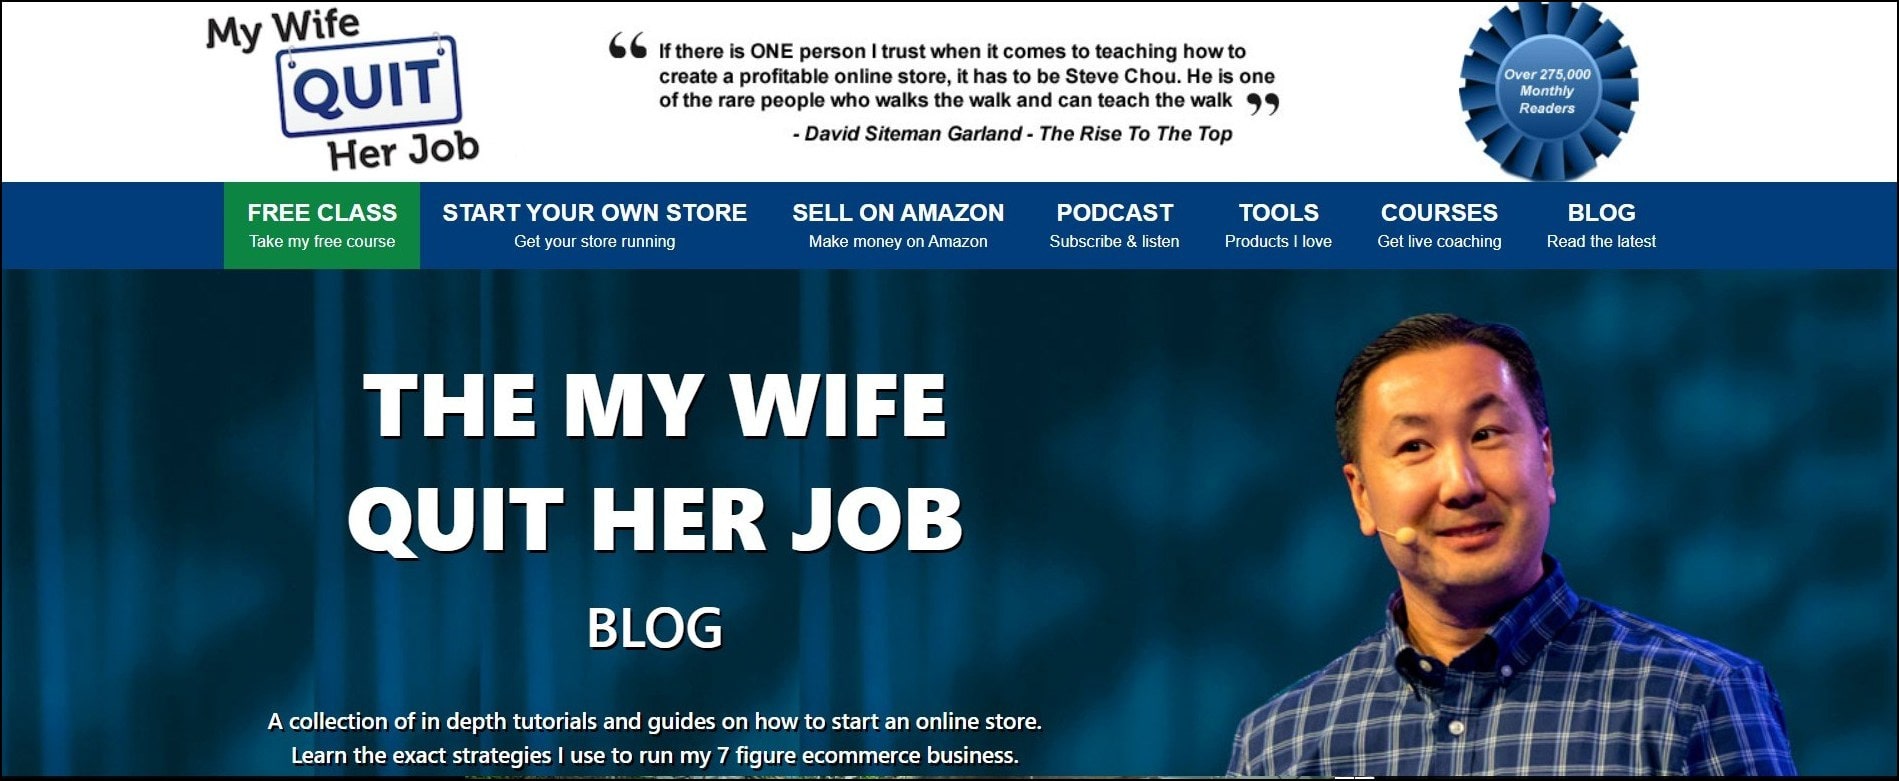 my wife quit her job - an ecommerce newsletter for scaling a profitable ecommerce business